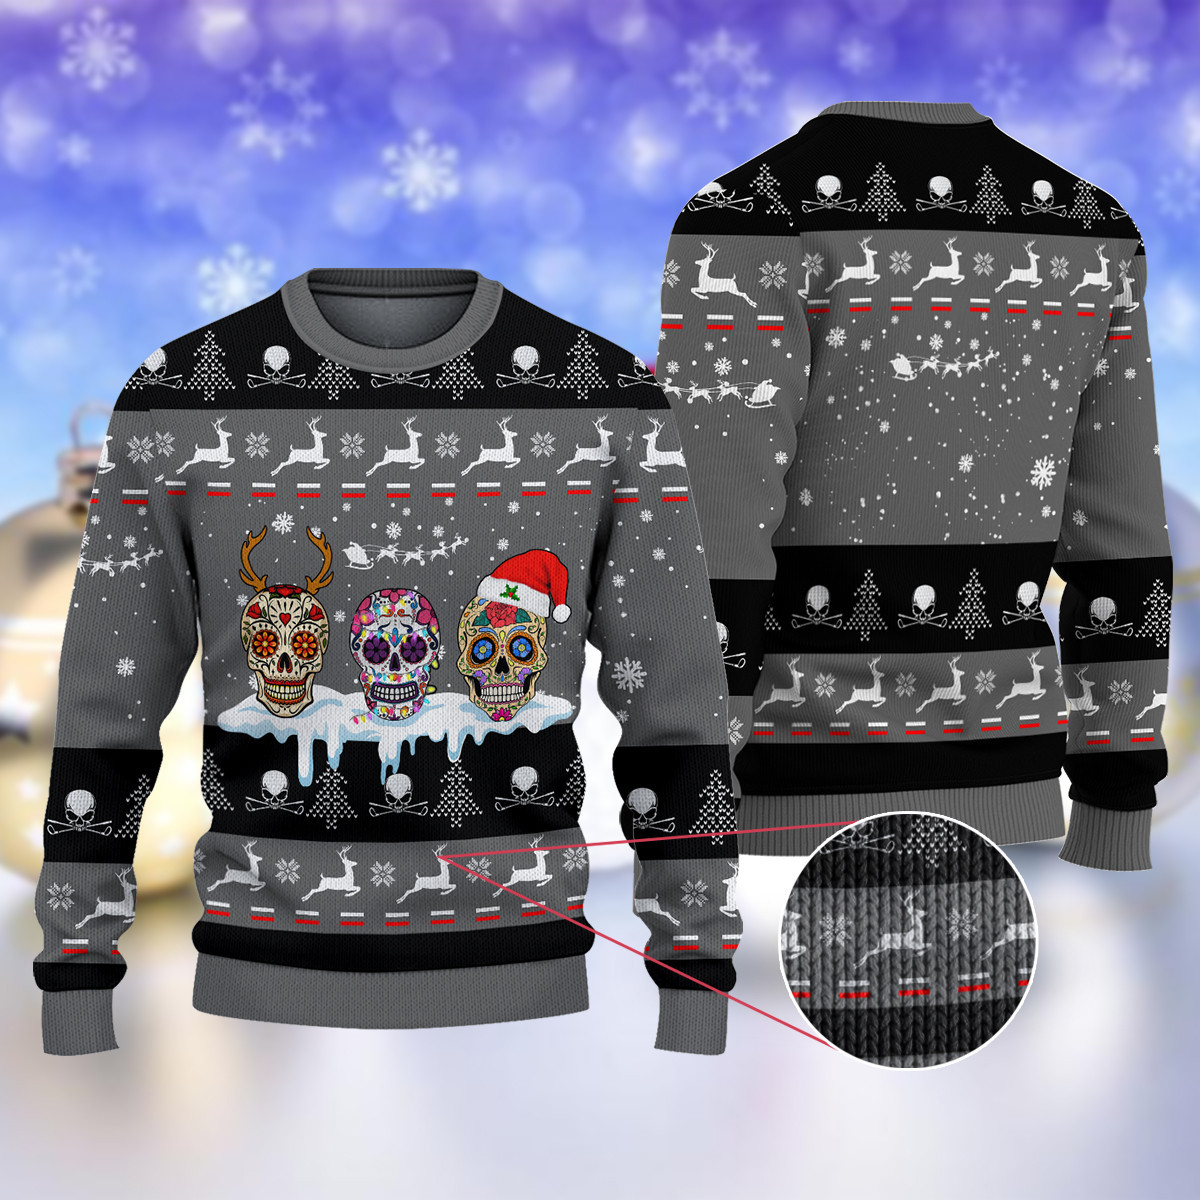 Golf Sugar Skull Gray Ugly Christmas Sweater Ugly Sweater For Men Women Holiday Sweater